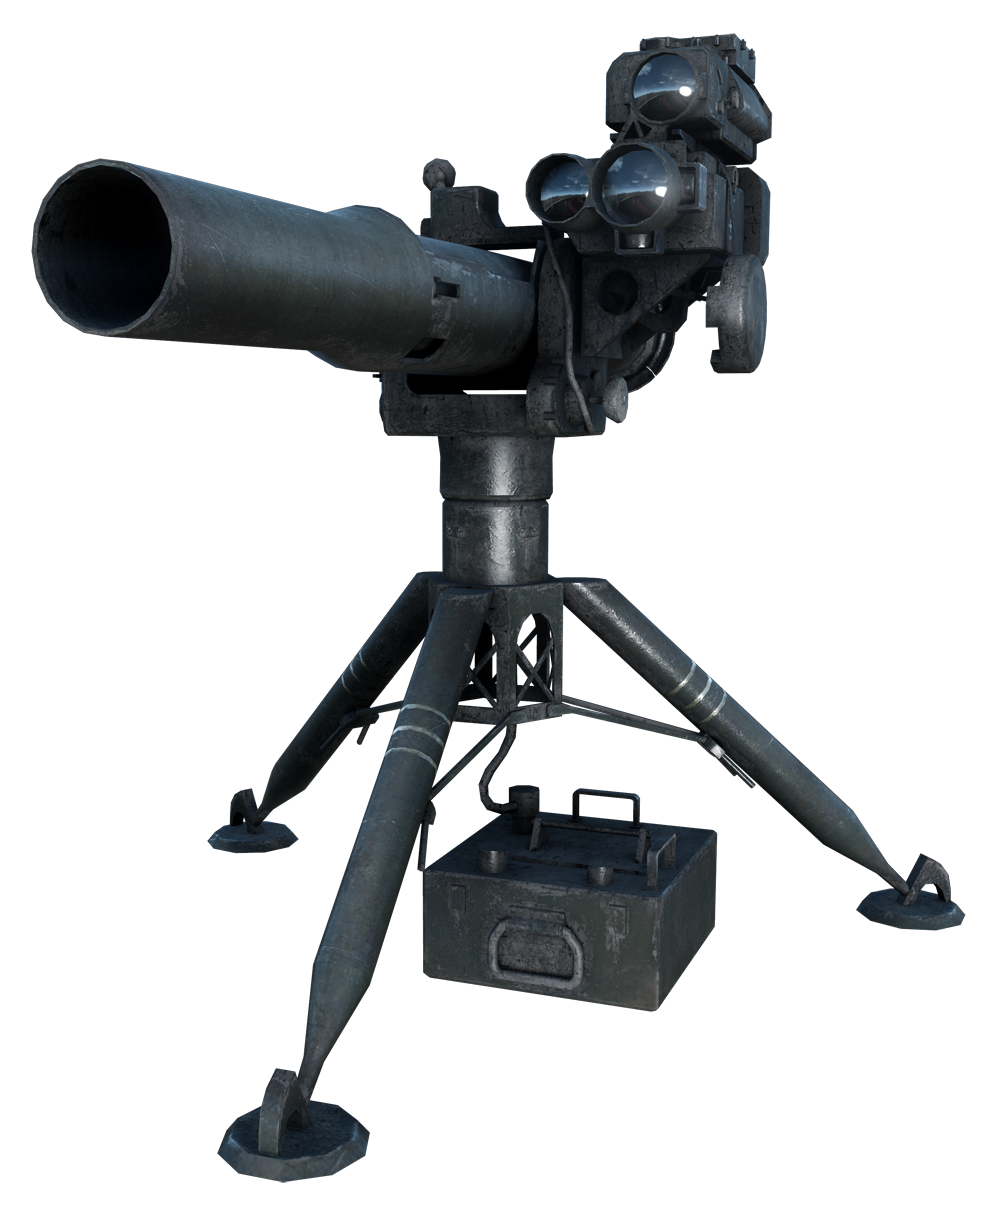 Bgm71 Angle Telescope Weapon Tow Missile Antitank PNG Image